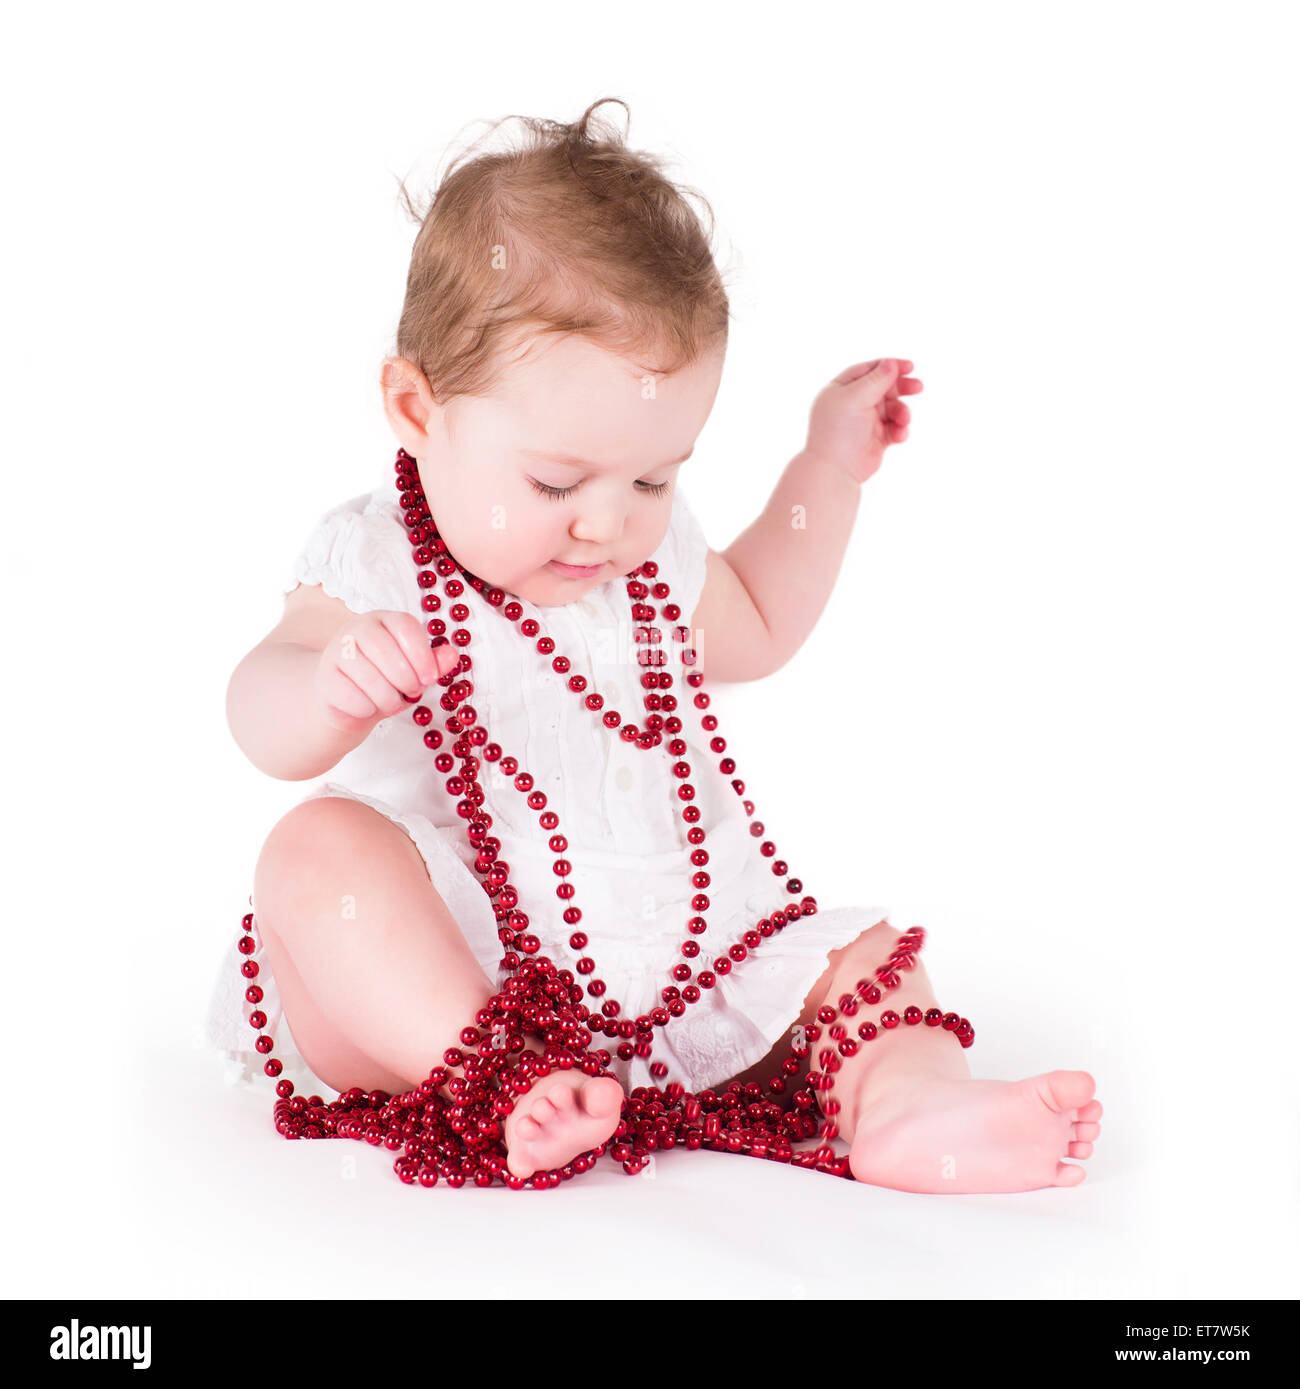 Funny baby girl playing with red pearls Stock Photo